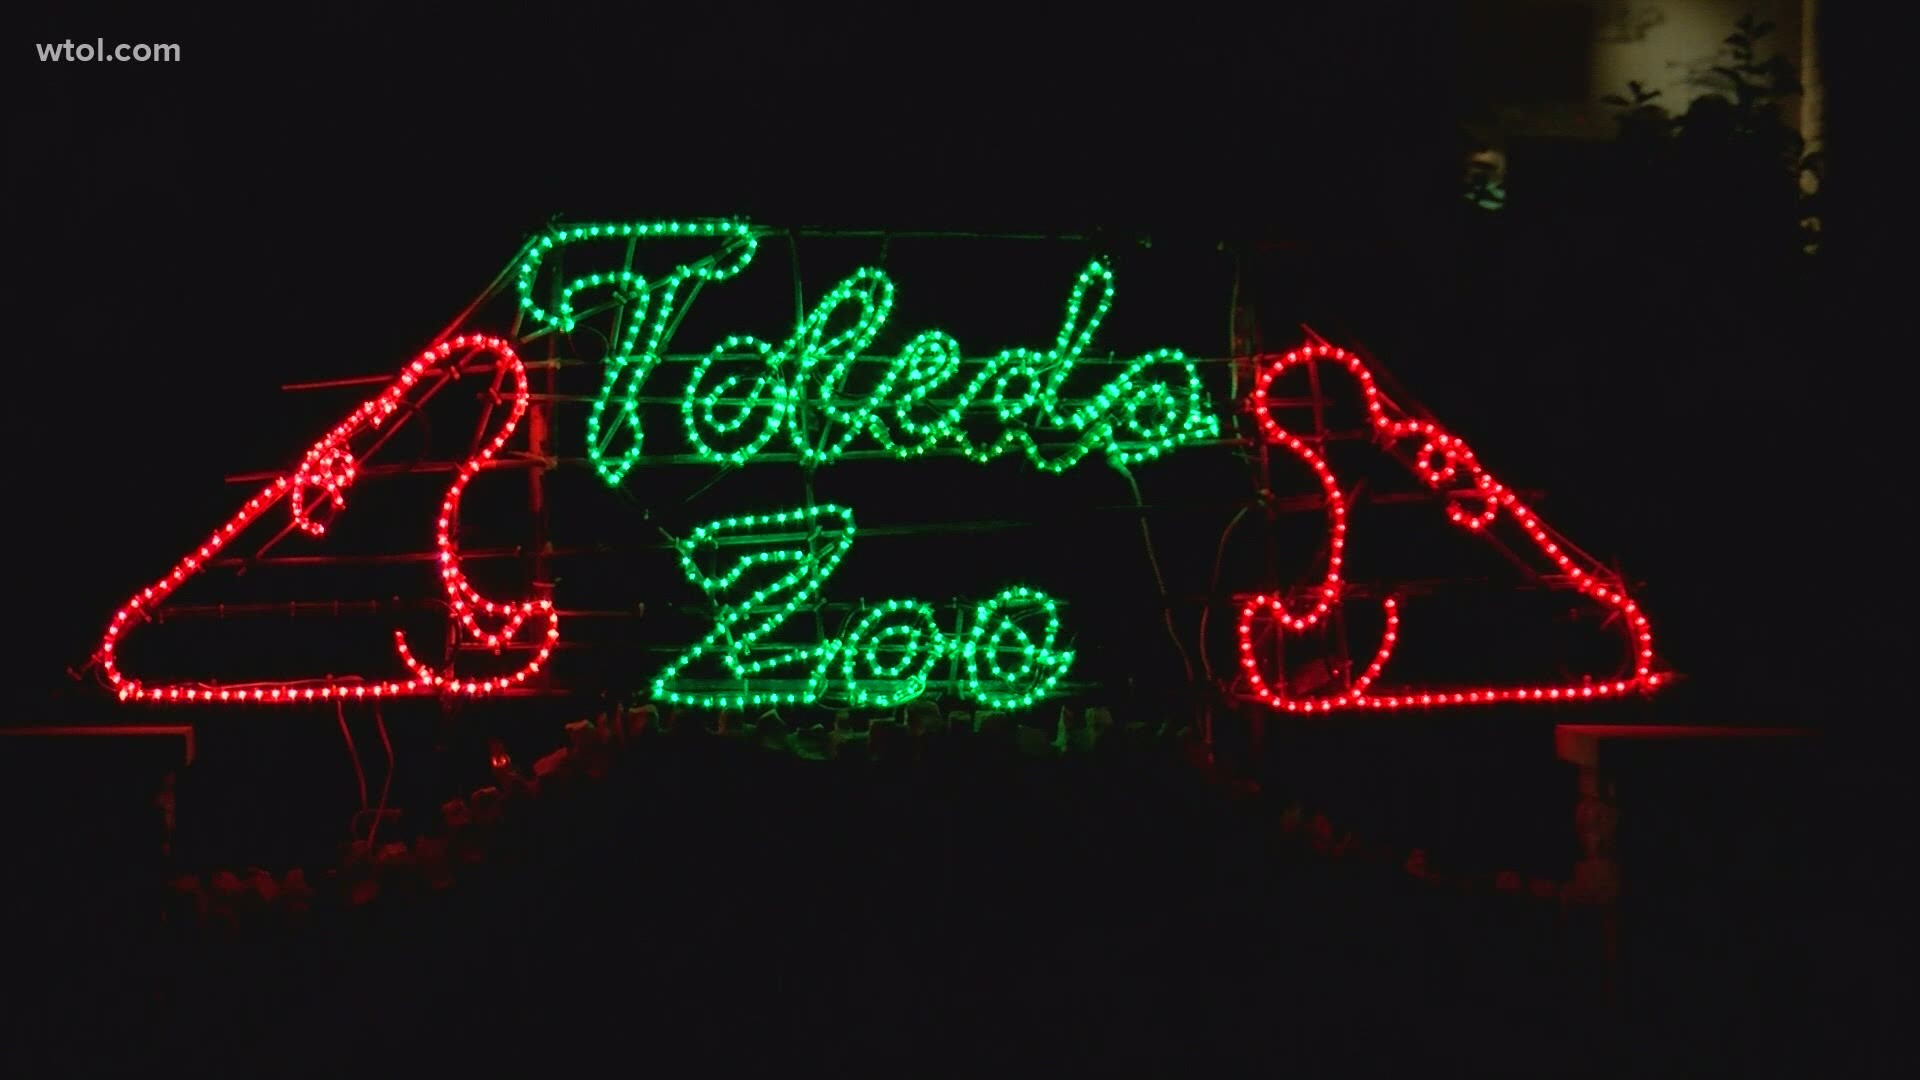 Toledo Zoo Lights Before Christmas has pandemic safety precautions in